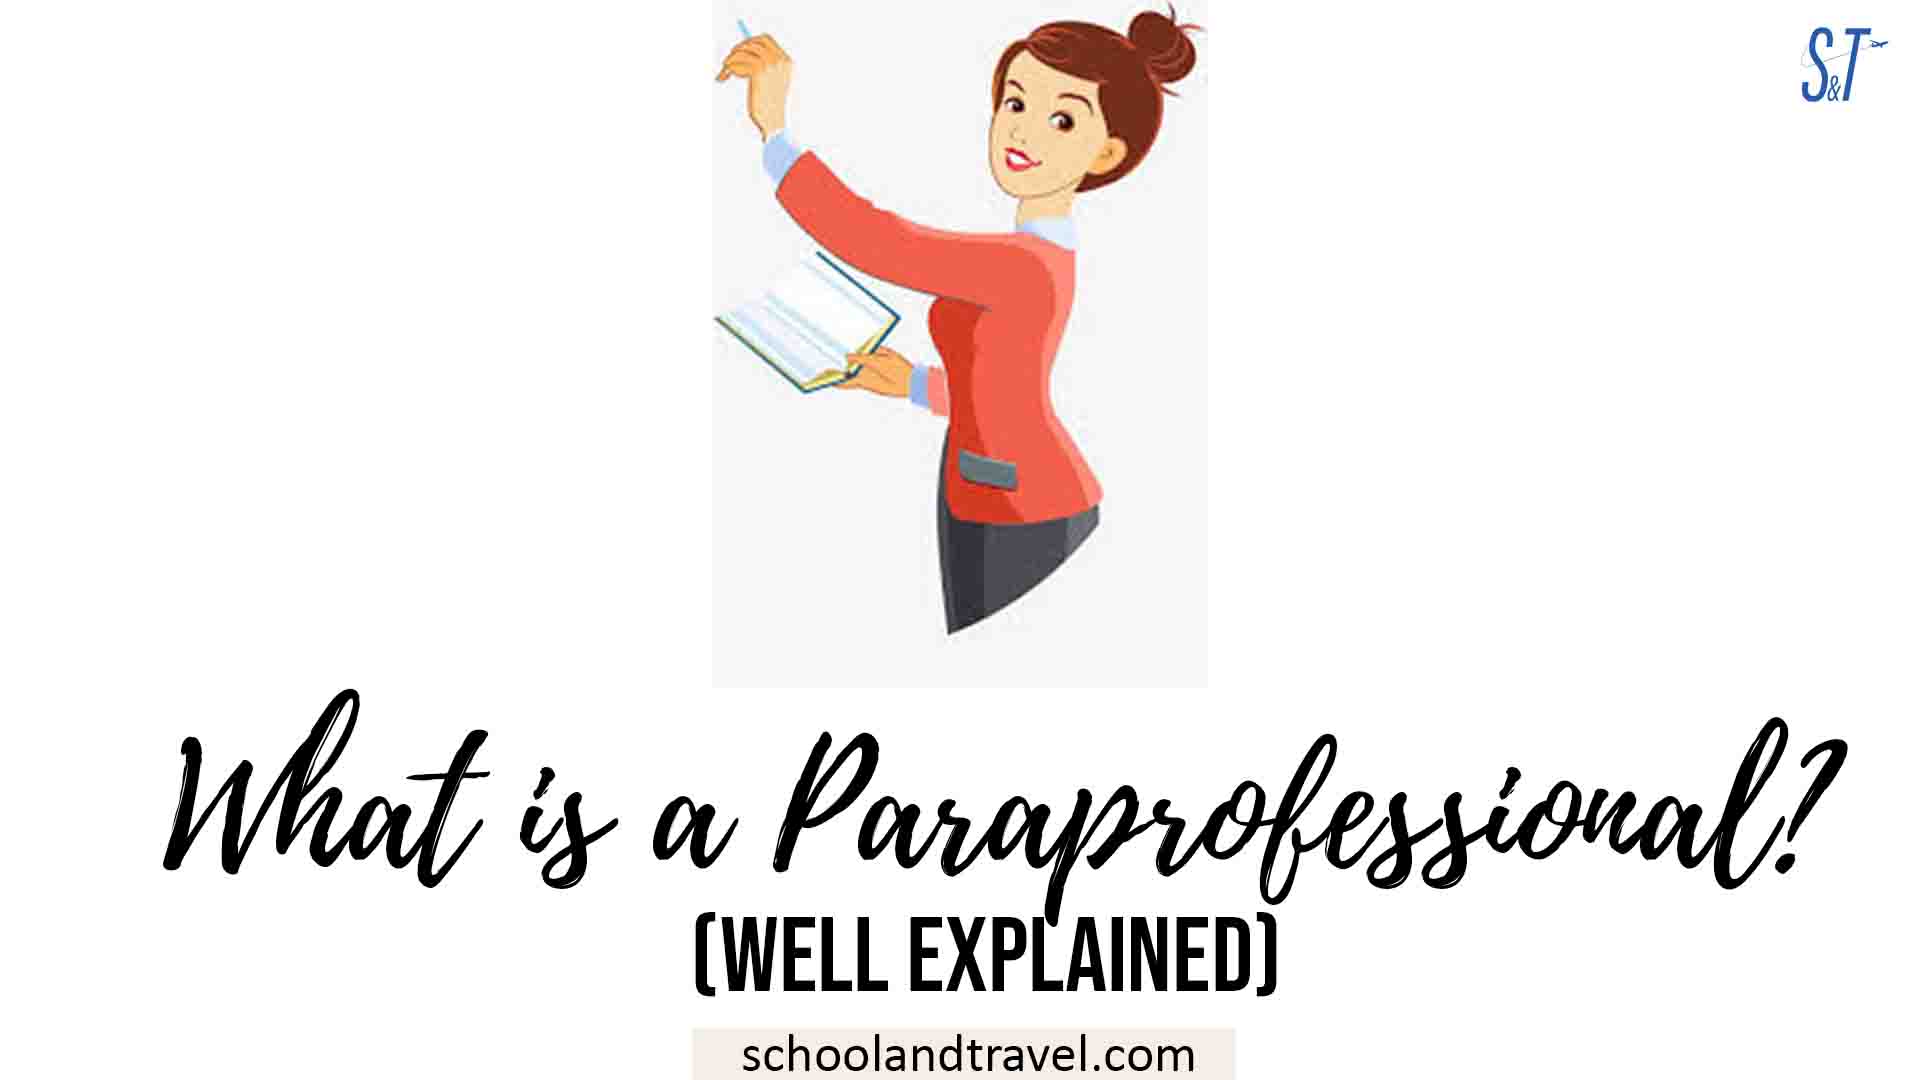 What is a Paraprofessional?